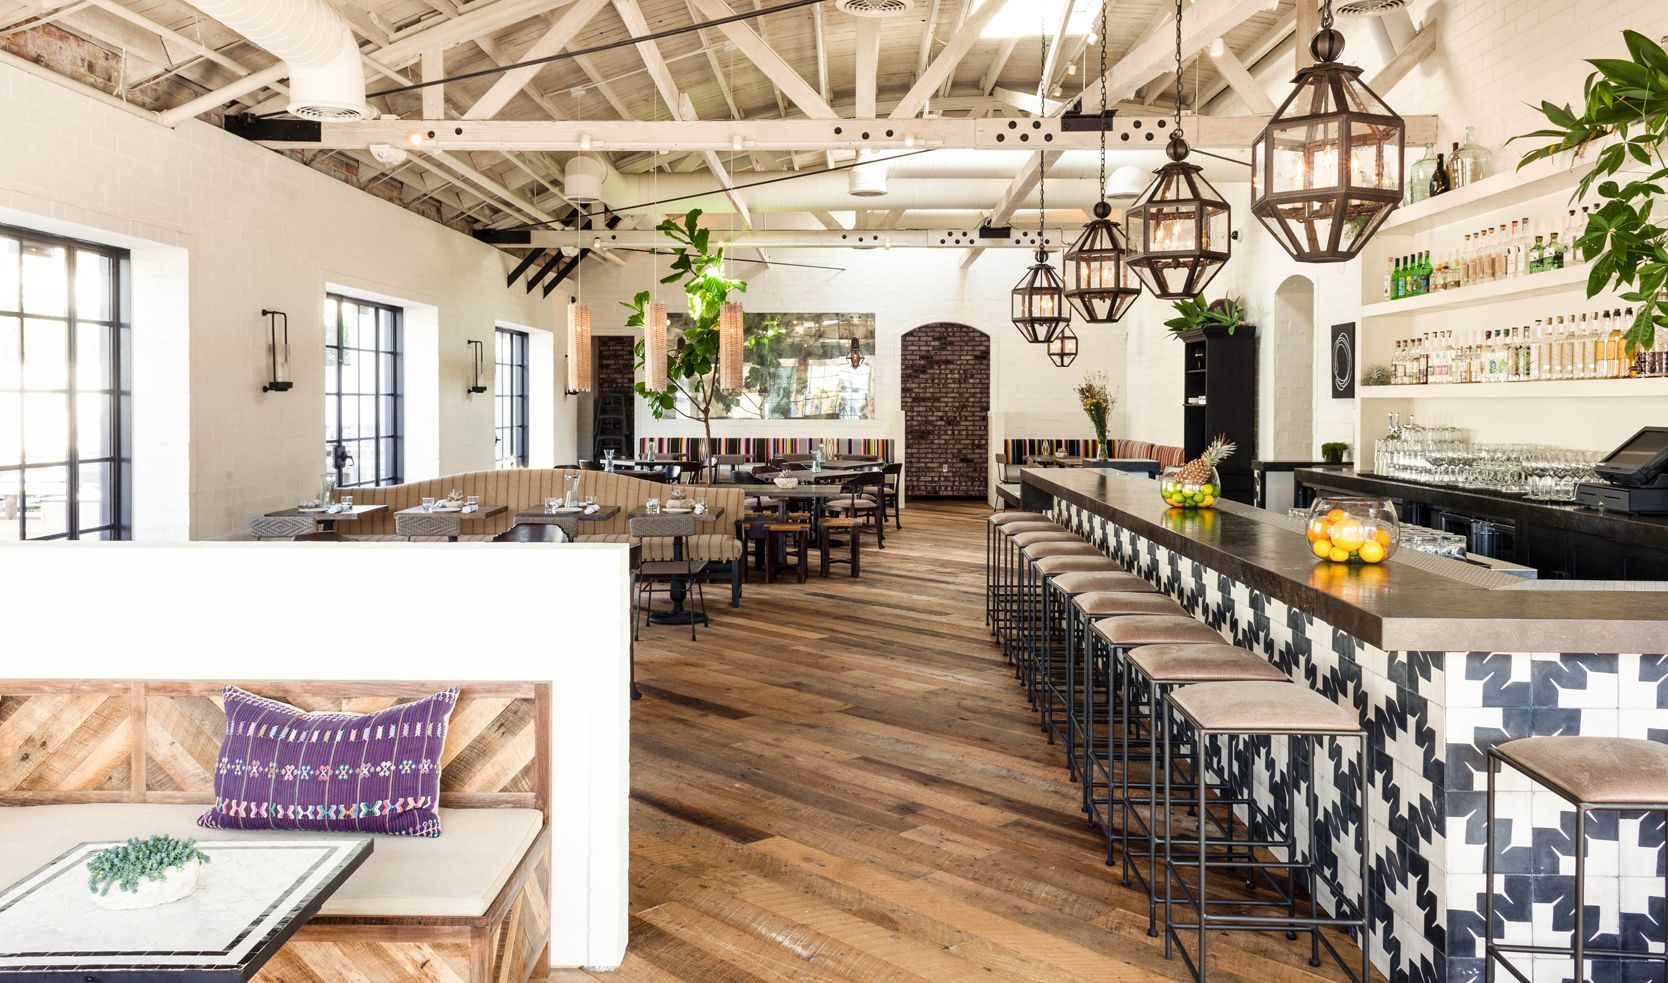 How to Choose the Best Restaurant Design Trends for Your Home